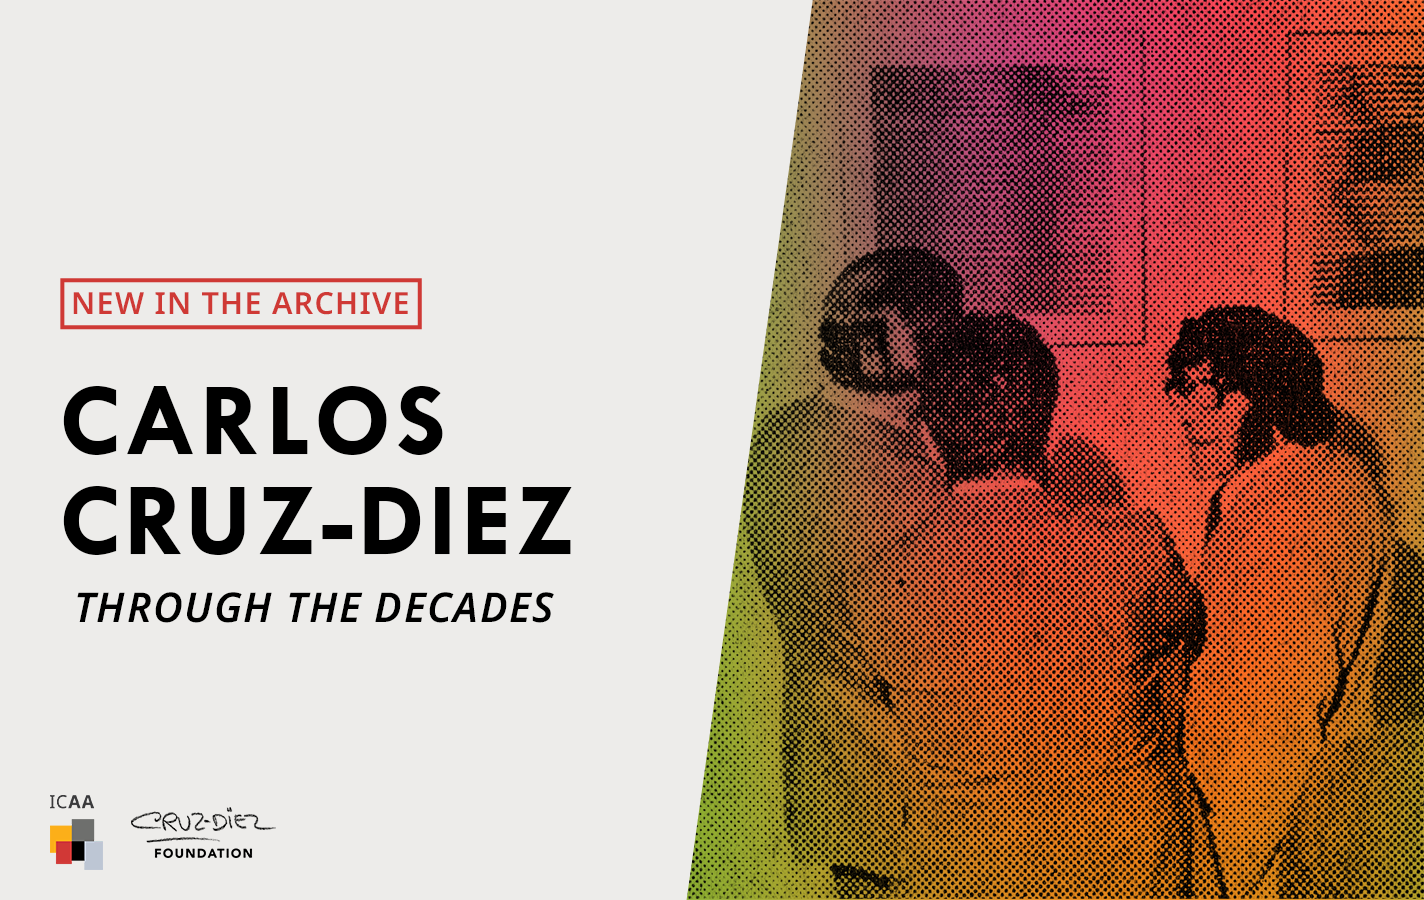 <p><strong>New in the Archive: Carlos Cruz-Diez through the Decades</strong></p>
